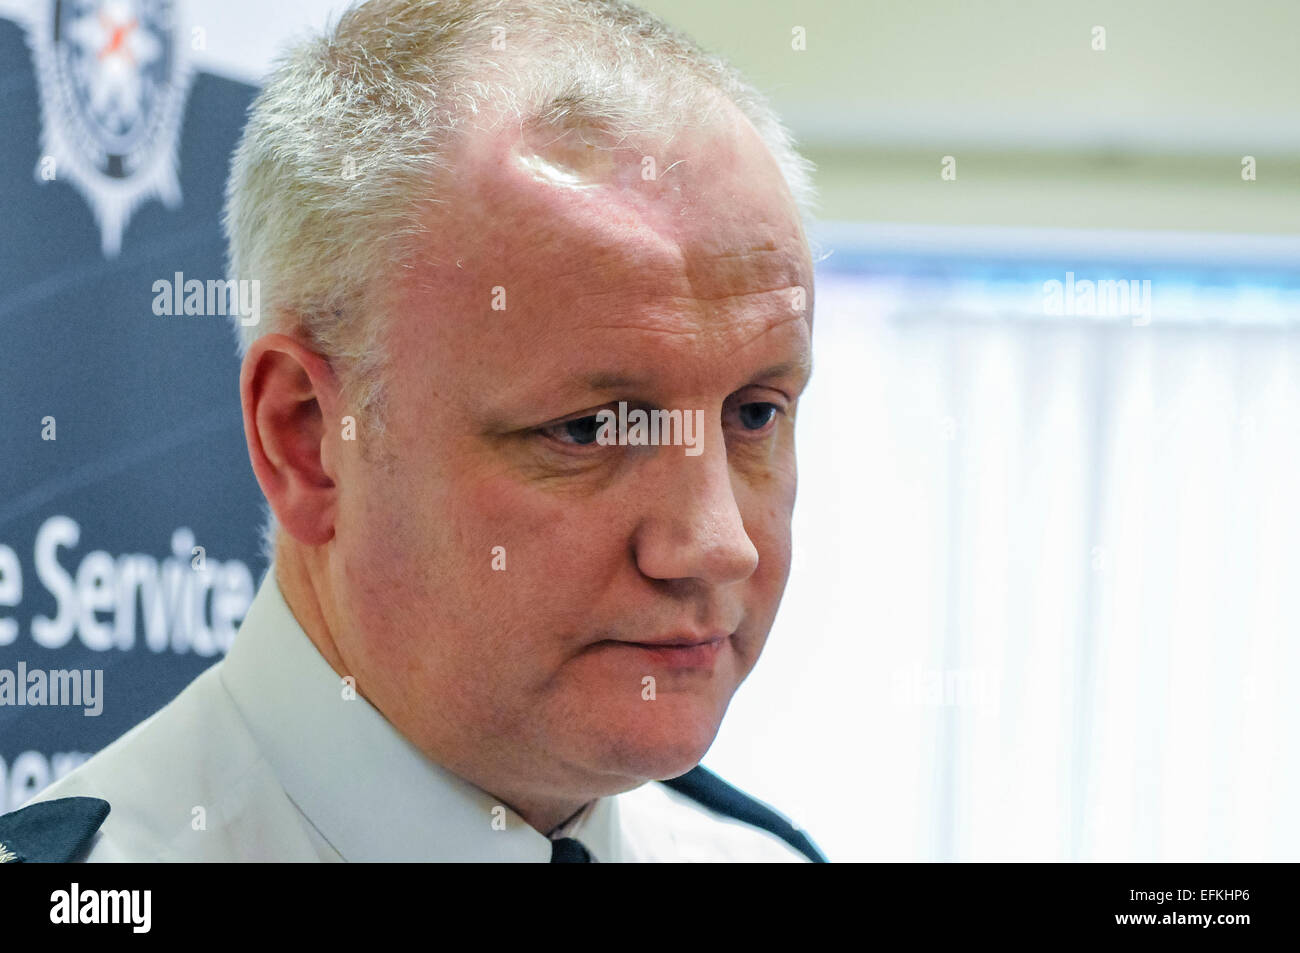 Belfast, Northern Ireland. 06 Feb 2015 - Chief Superintendent Nigel Grimshaw from the PSNI holds a press conference regarding pipe bomb attacks over the past 24 hours. He said that all four devices showed strong similarities, and police were treating them all as linked. Credit:  Stephen Barnes/Alamy Live News Stock Photo